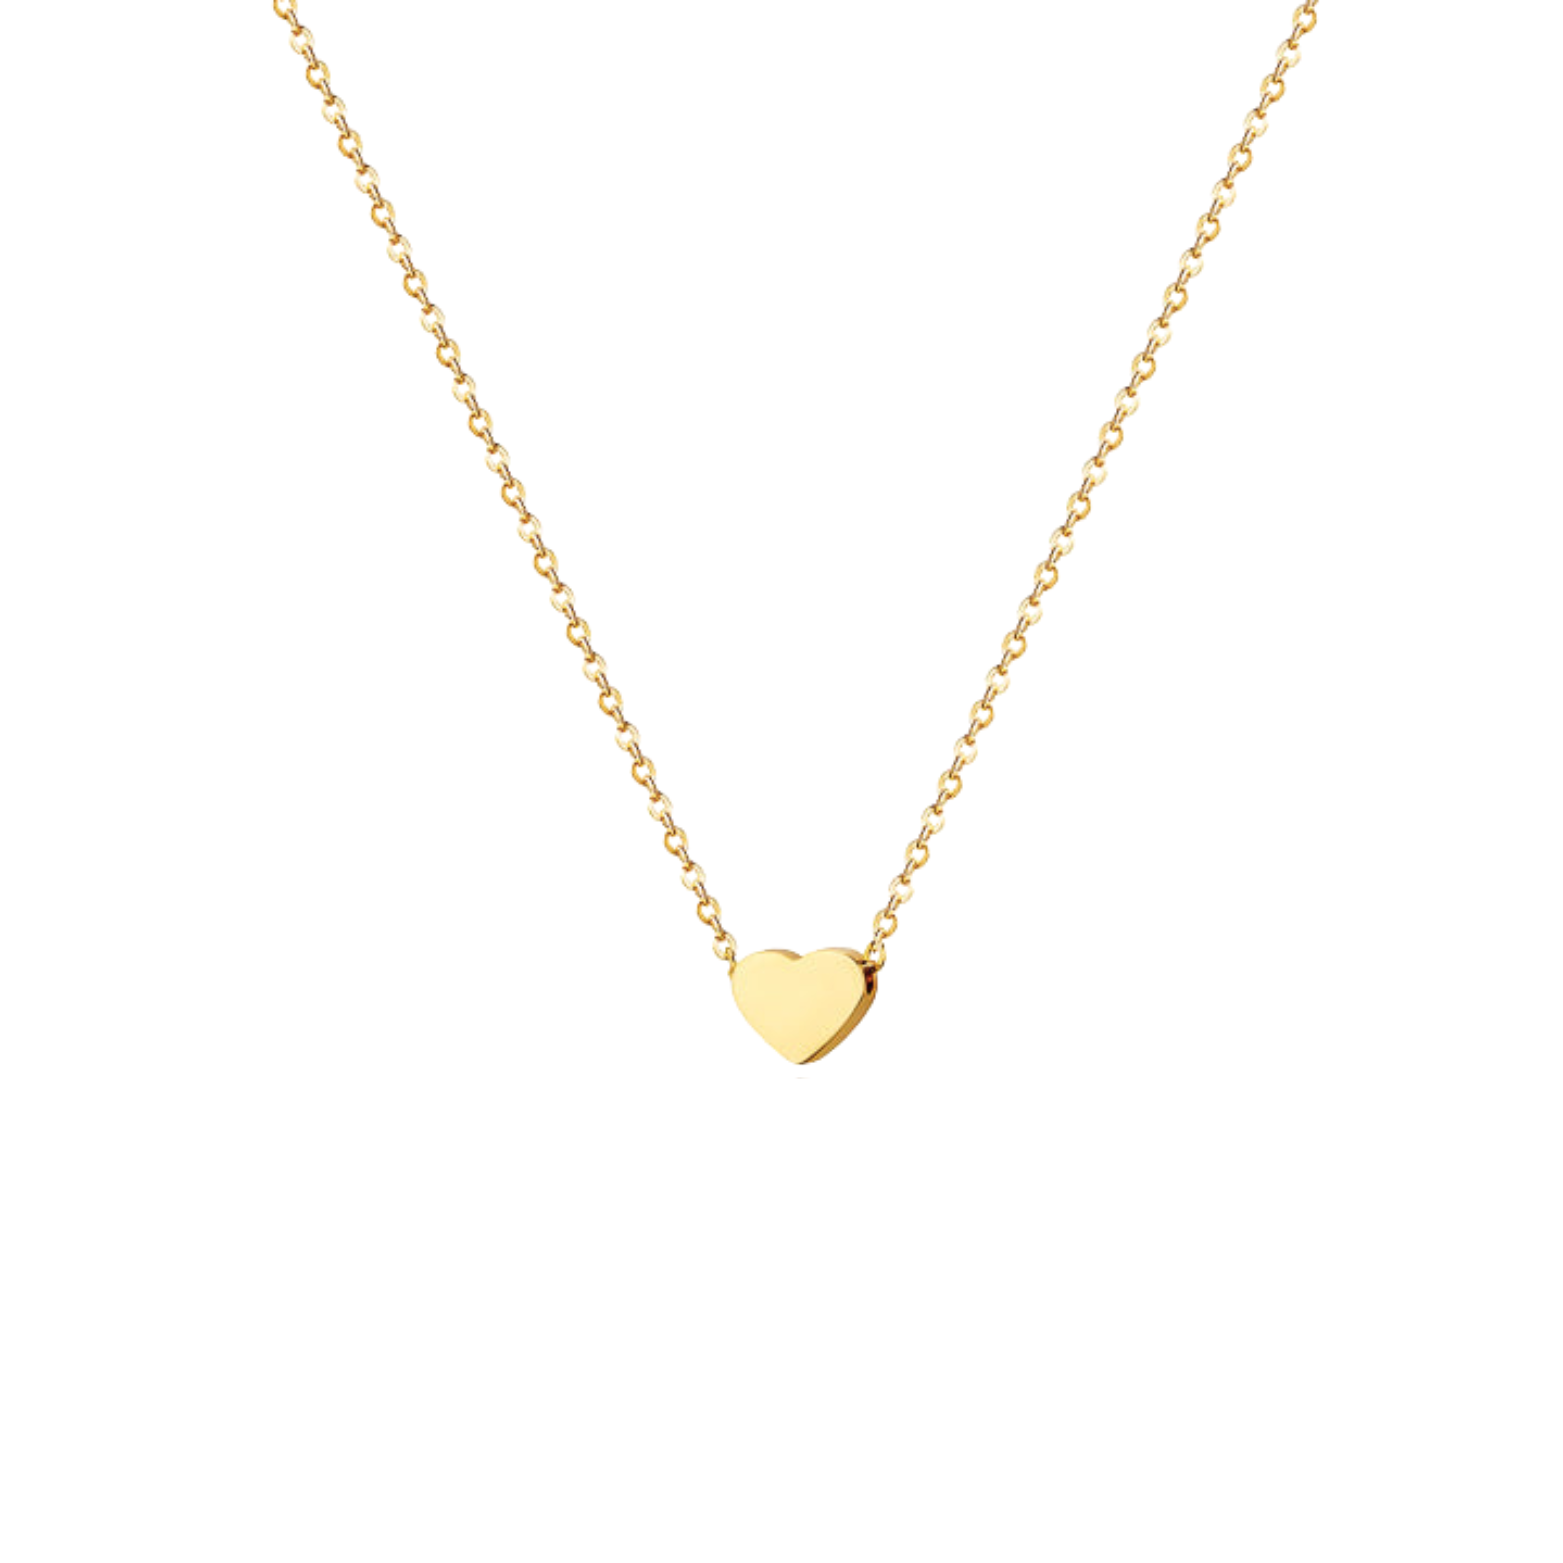 14K gold-plated 'Amore' necklace with heart pendant on a pure white background